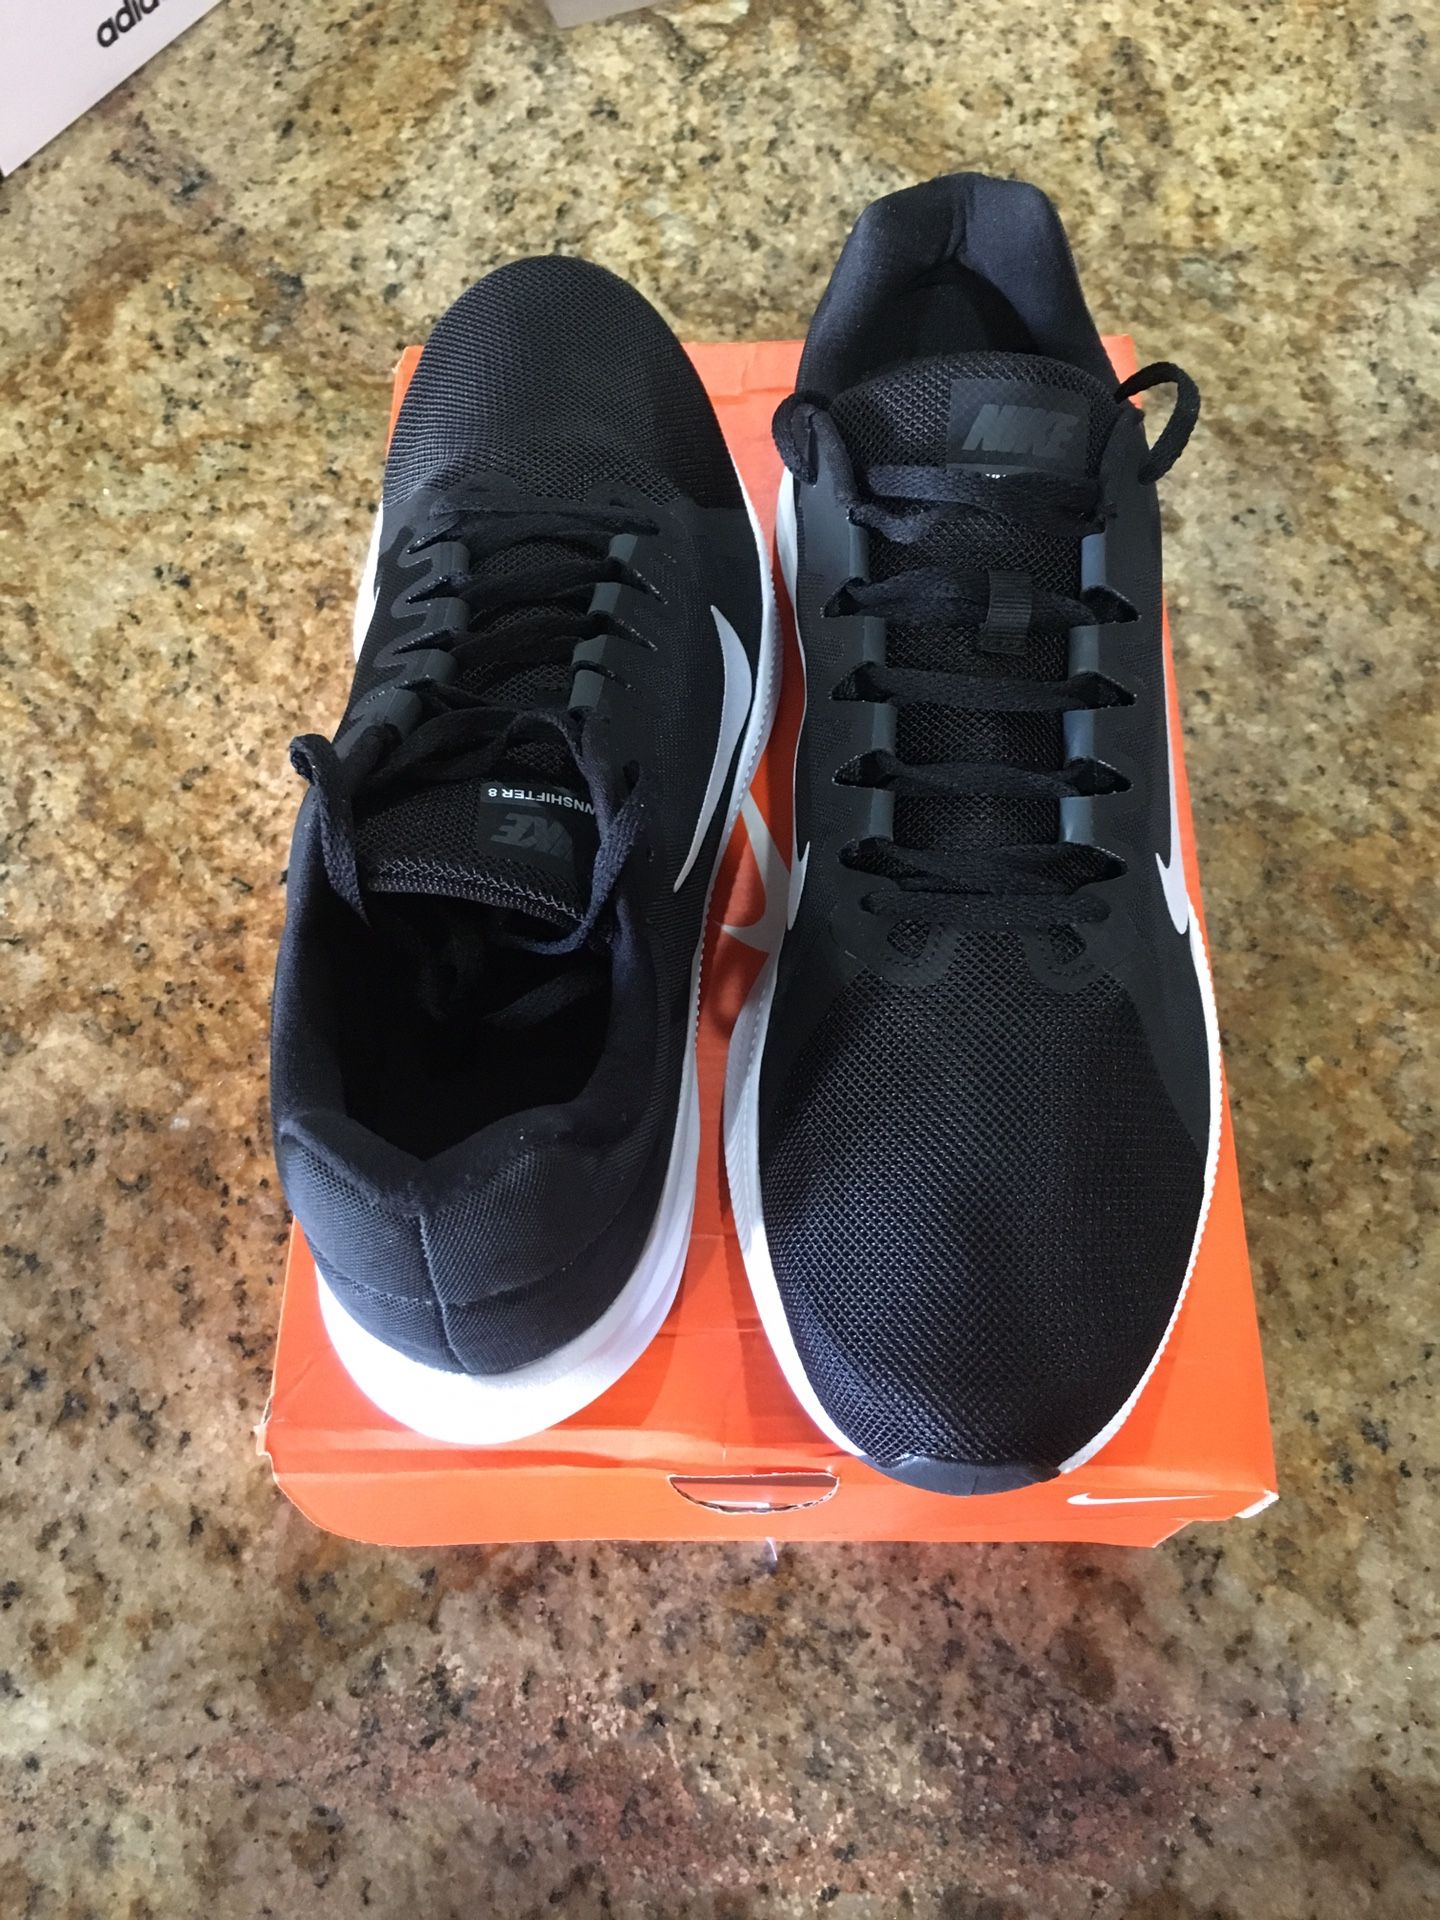 Nike Downshifter size 14 brand new